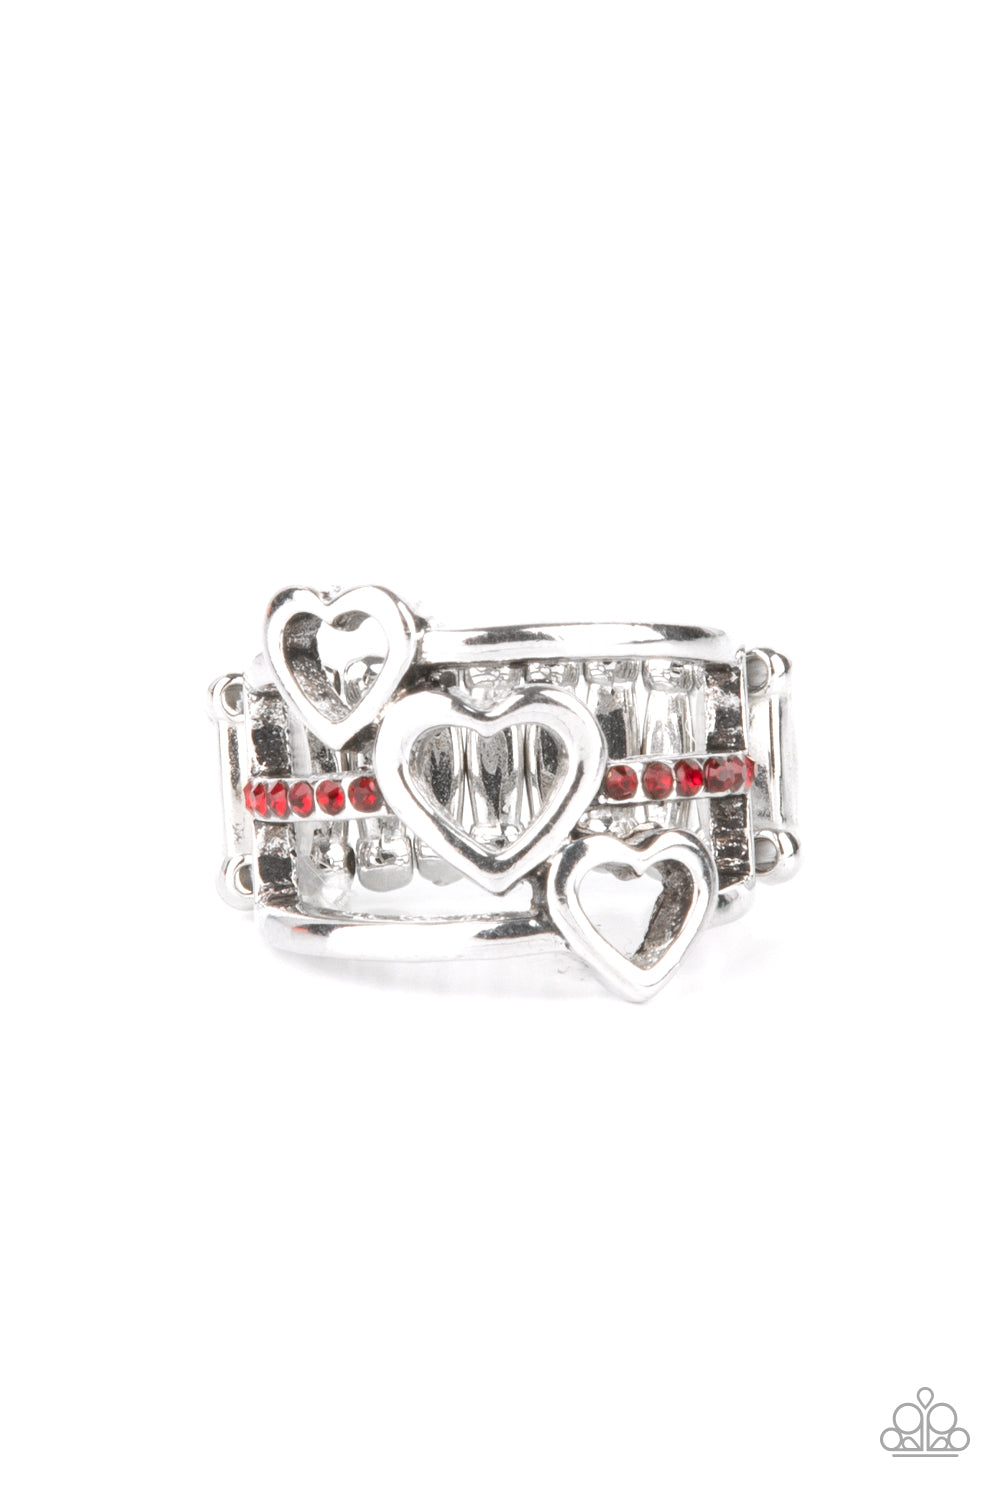 Give Me AMOR - red - Paparazzi ring